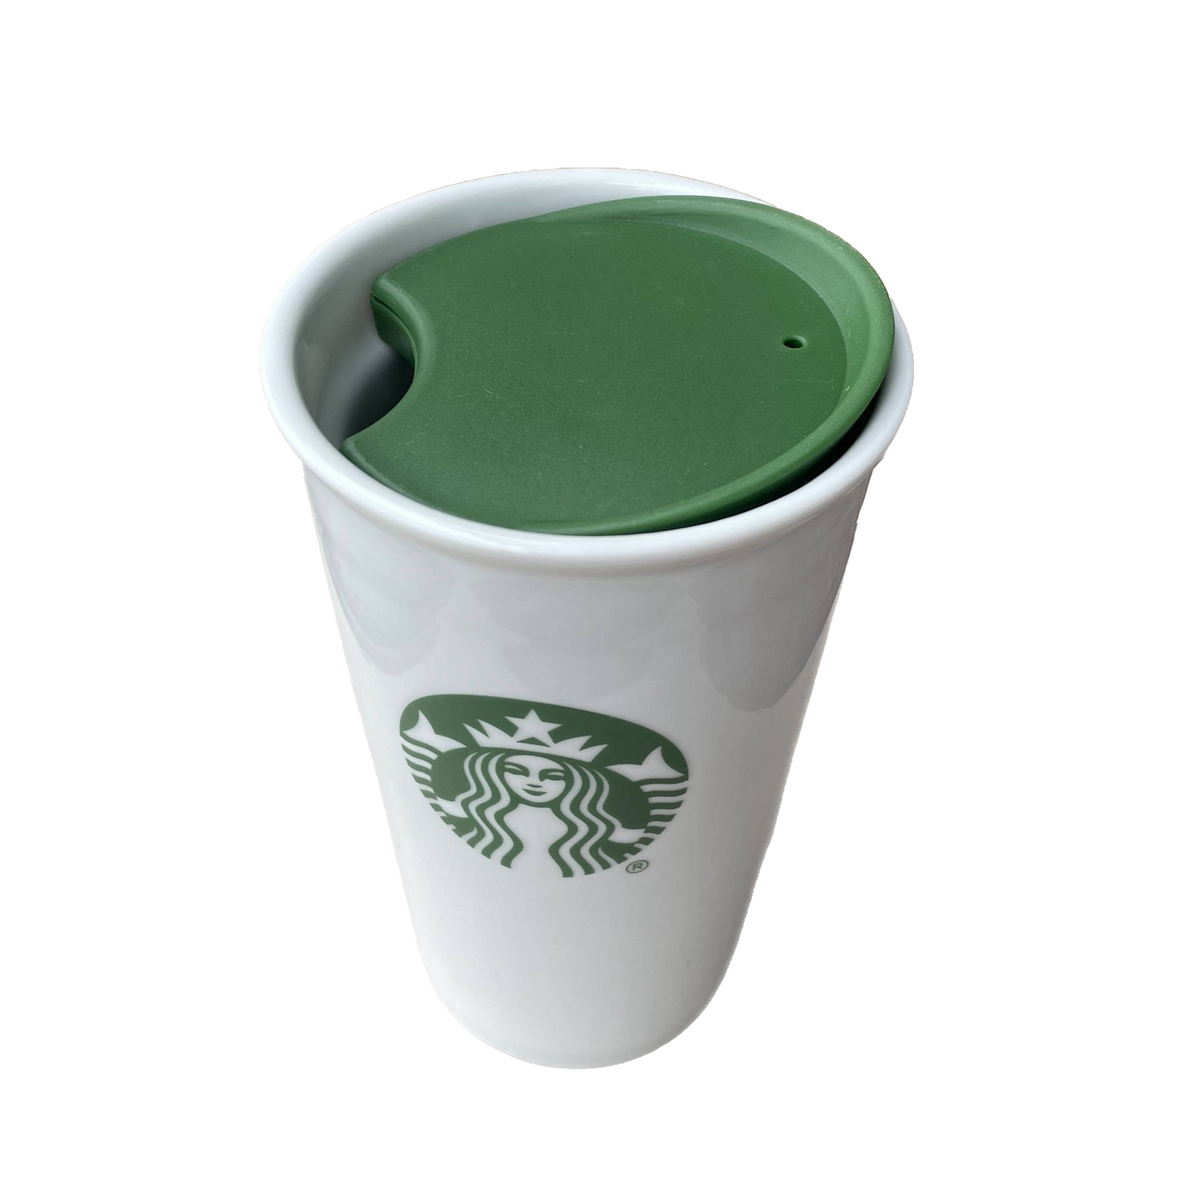 Starbucks Ceramic Travel Mugs w/ Lids 4-Count Gift Set Only $19.99 Shipped  at Costco (Regularly $40)